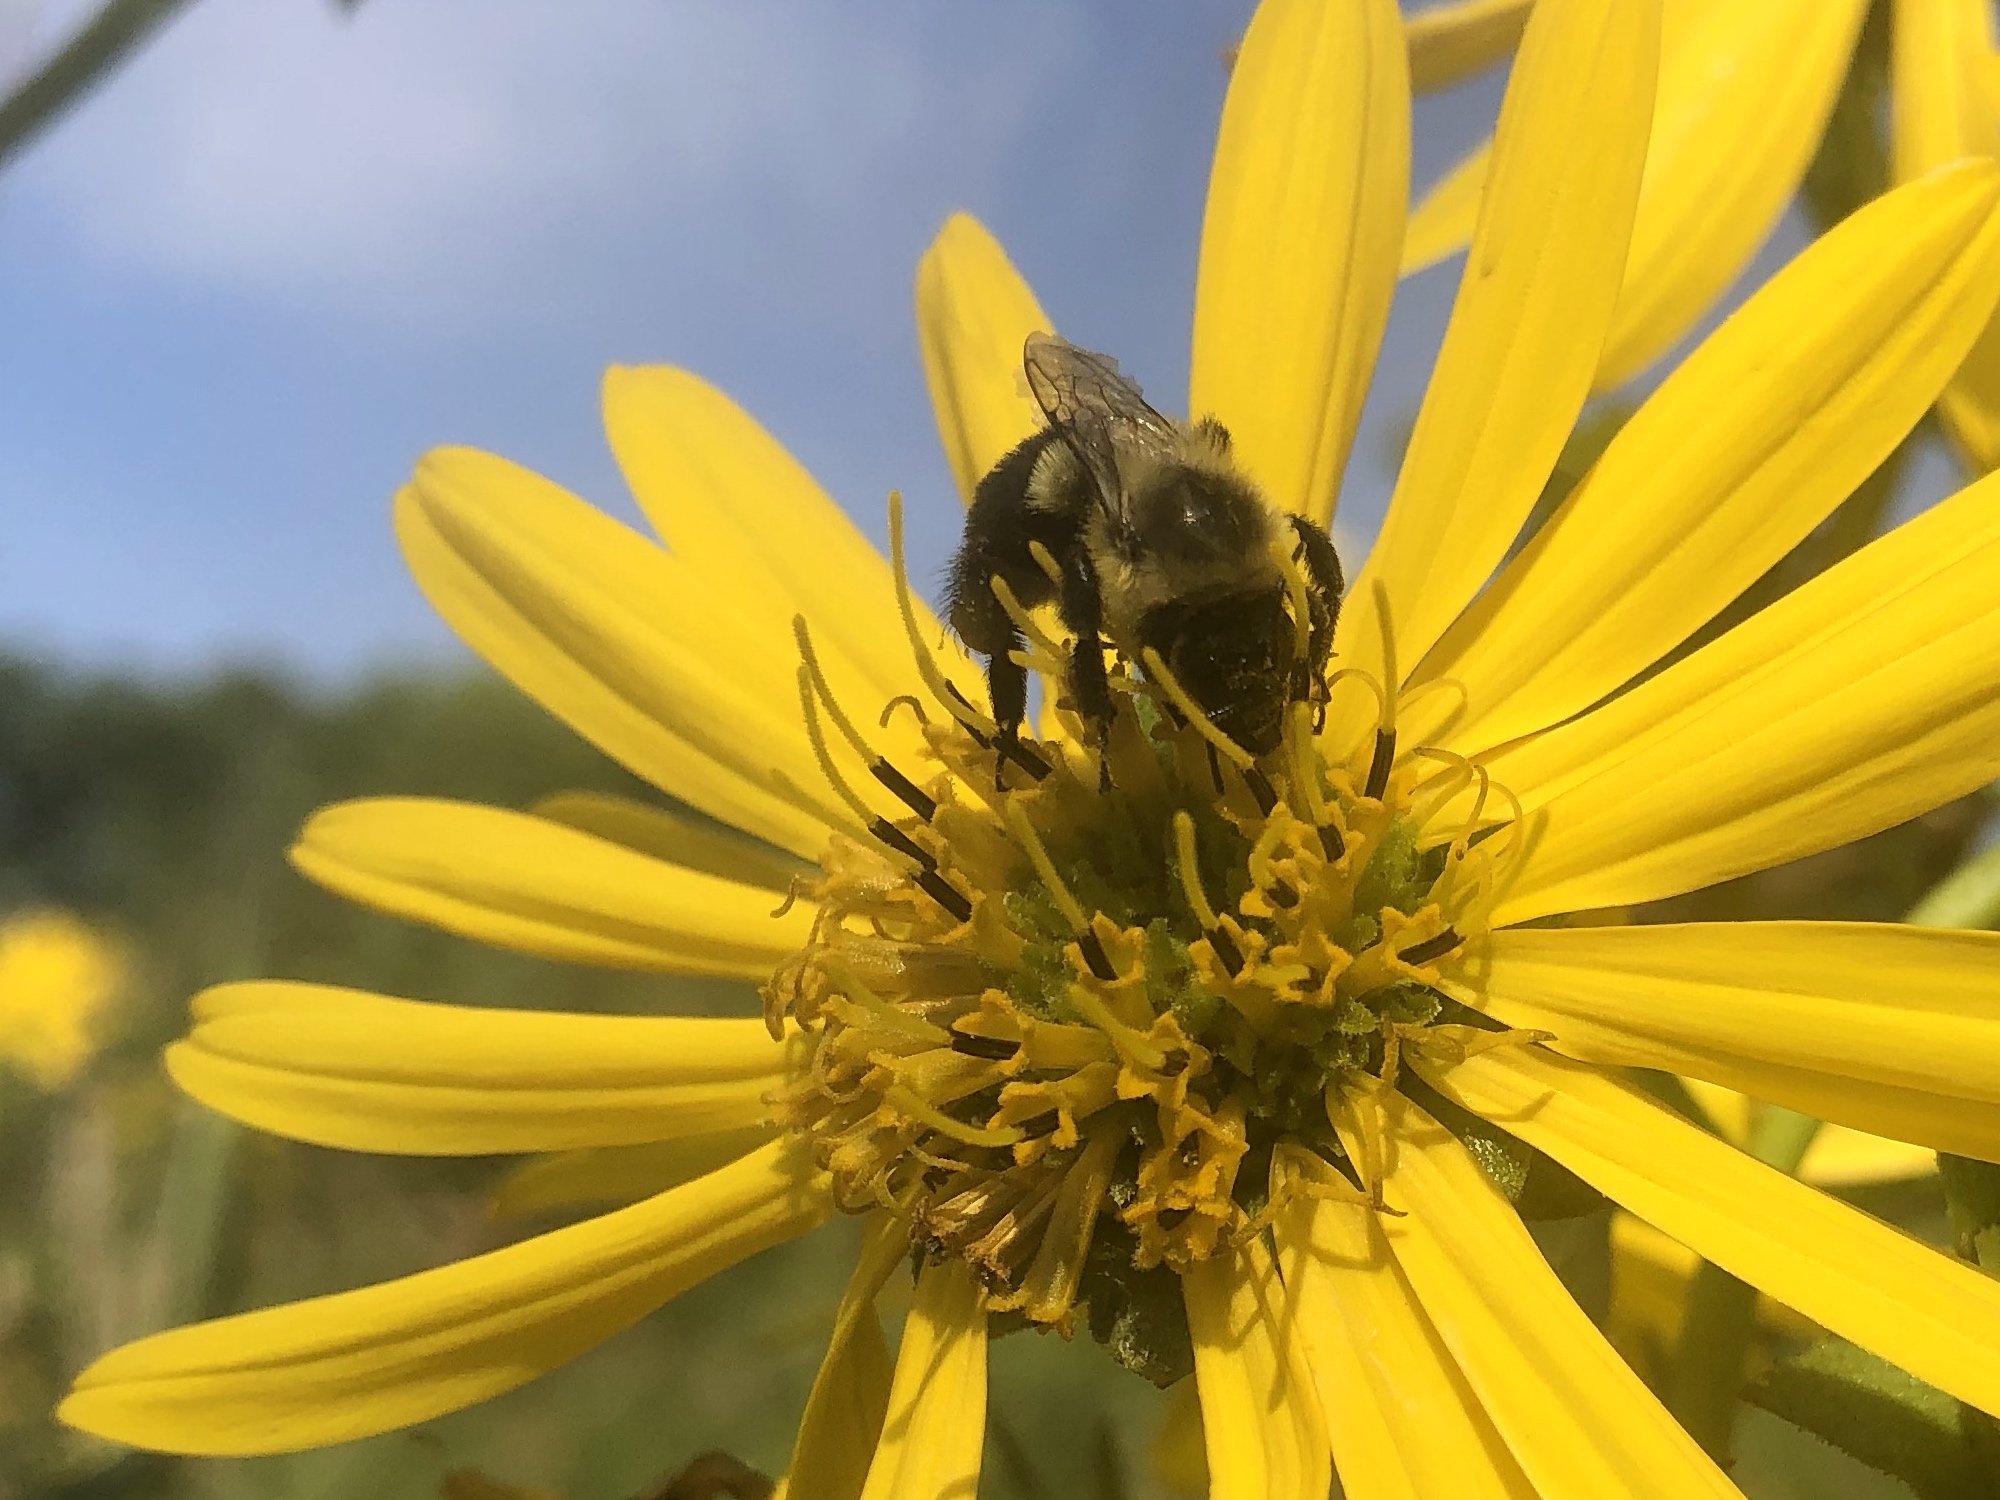 Bumblebee on Cup Planton bank of Marion Dunn Pond on August 17, 2020.